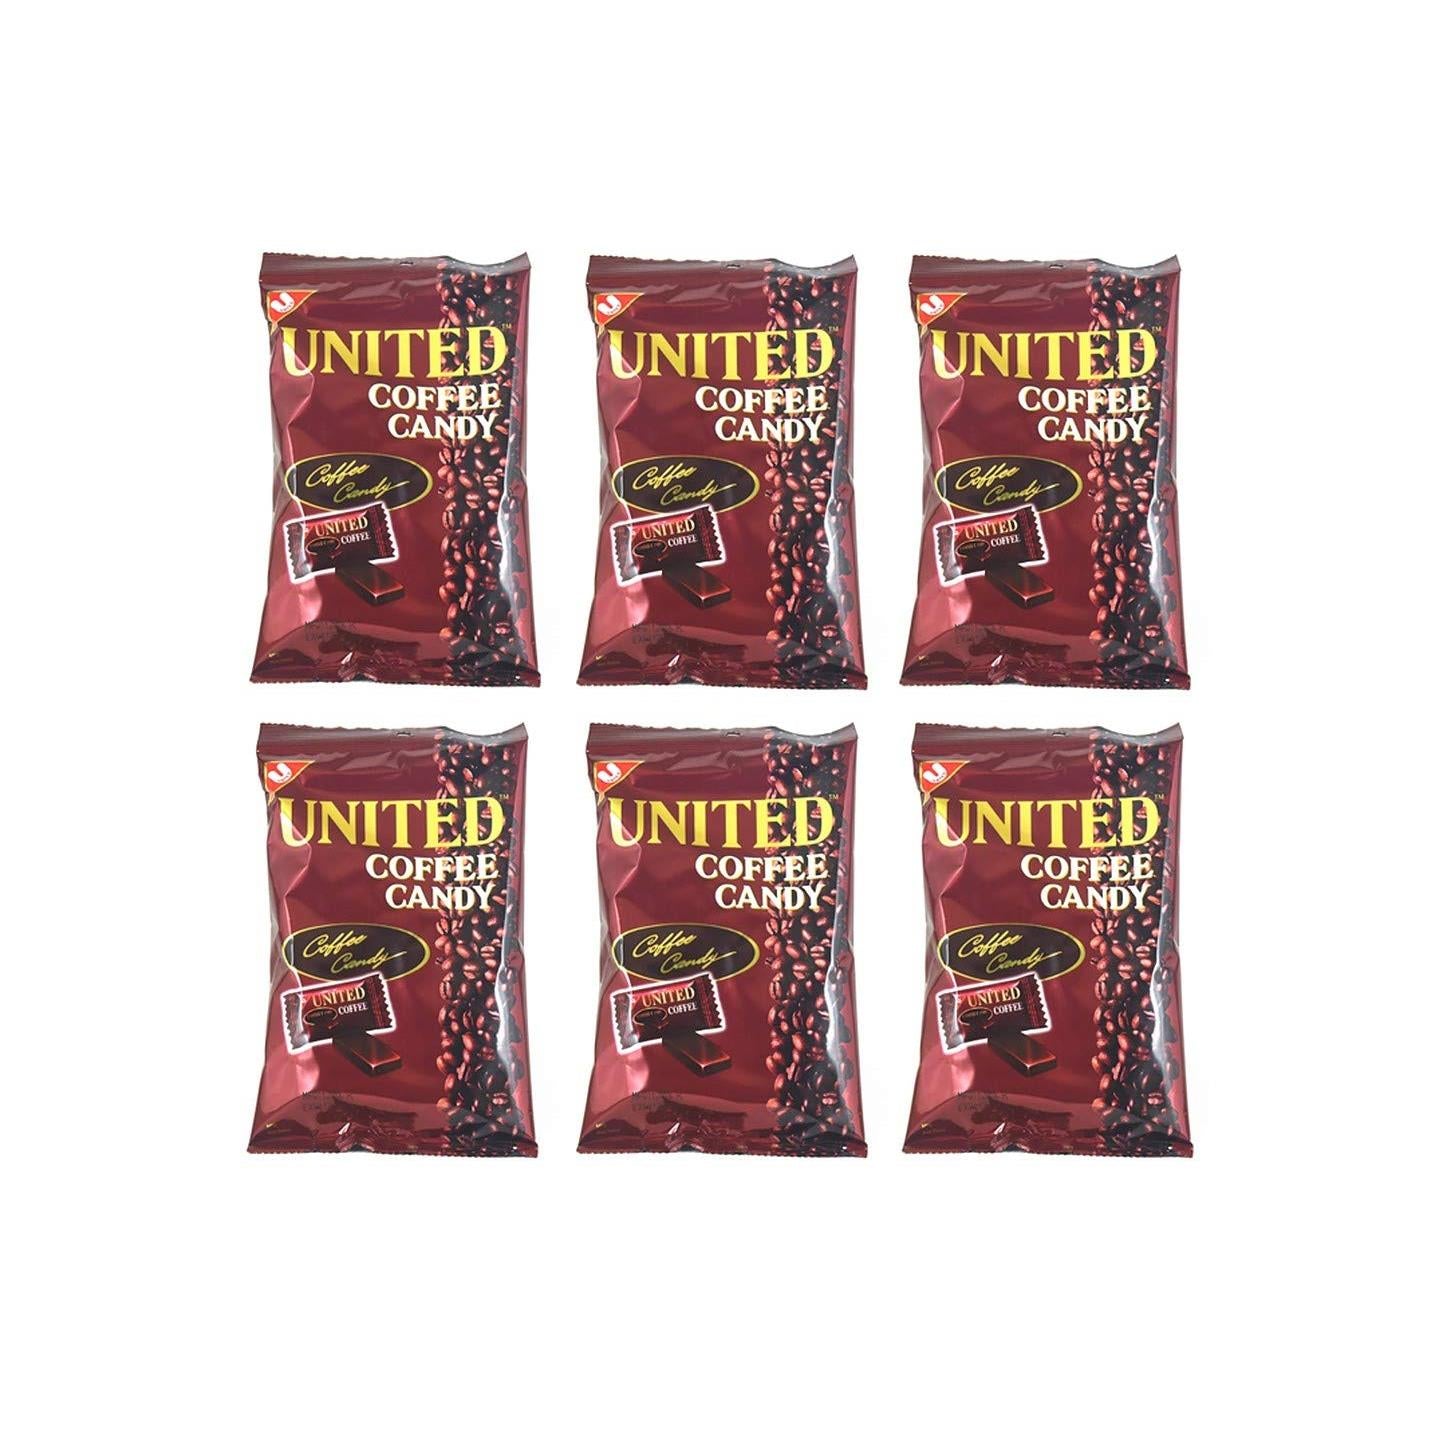 United Coffee Candy 125g, 6 Pack